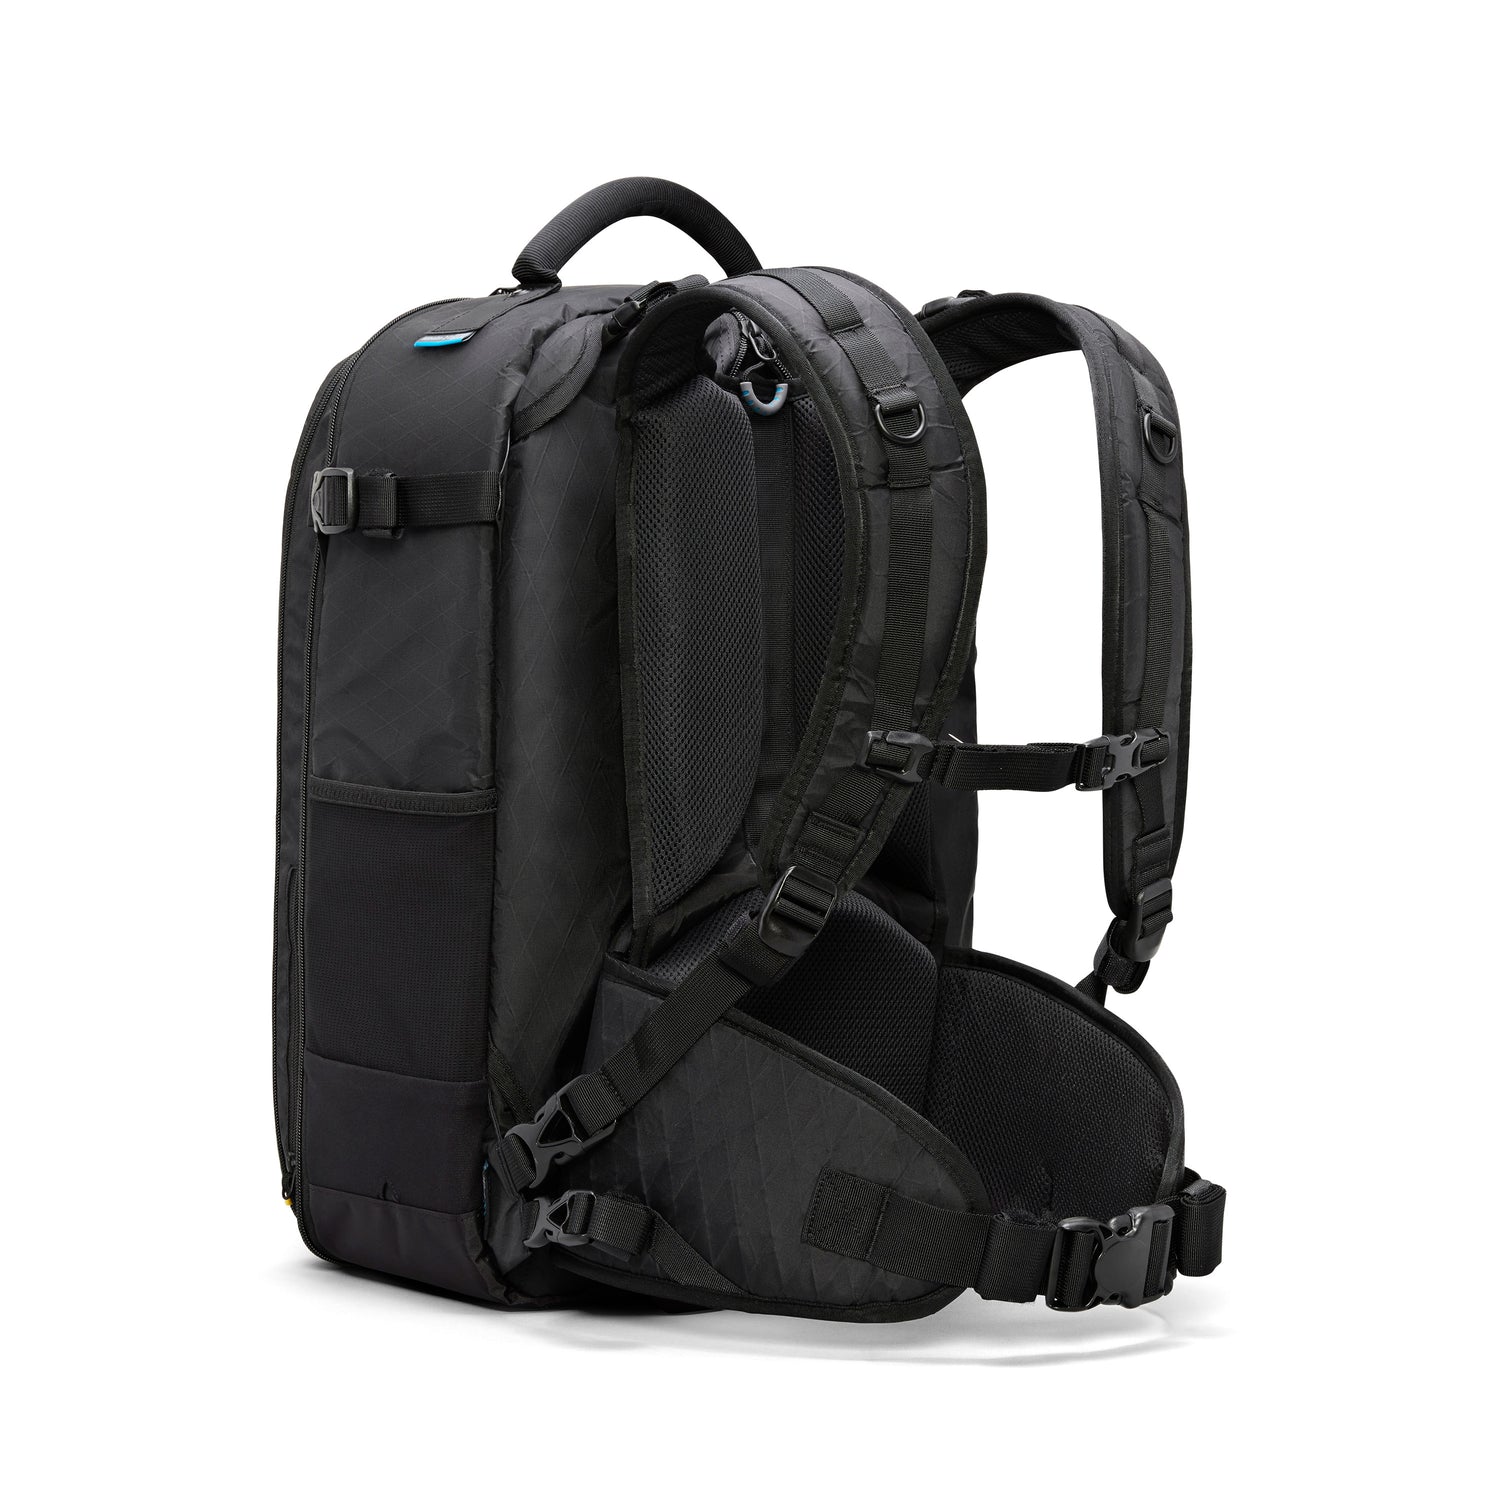 Buy Online Camera Bags  DSLR & Mirrorless Bags at Best Prices in